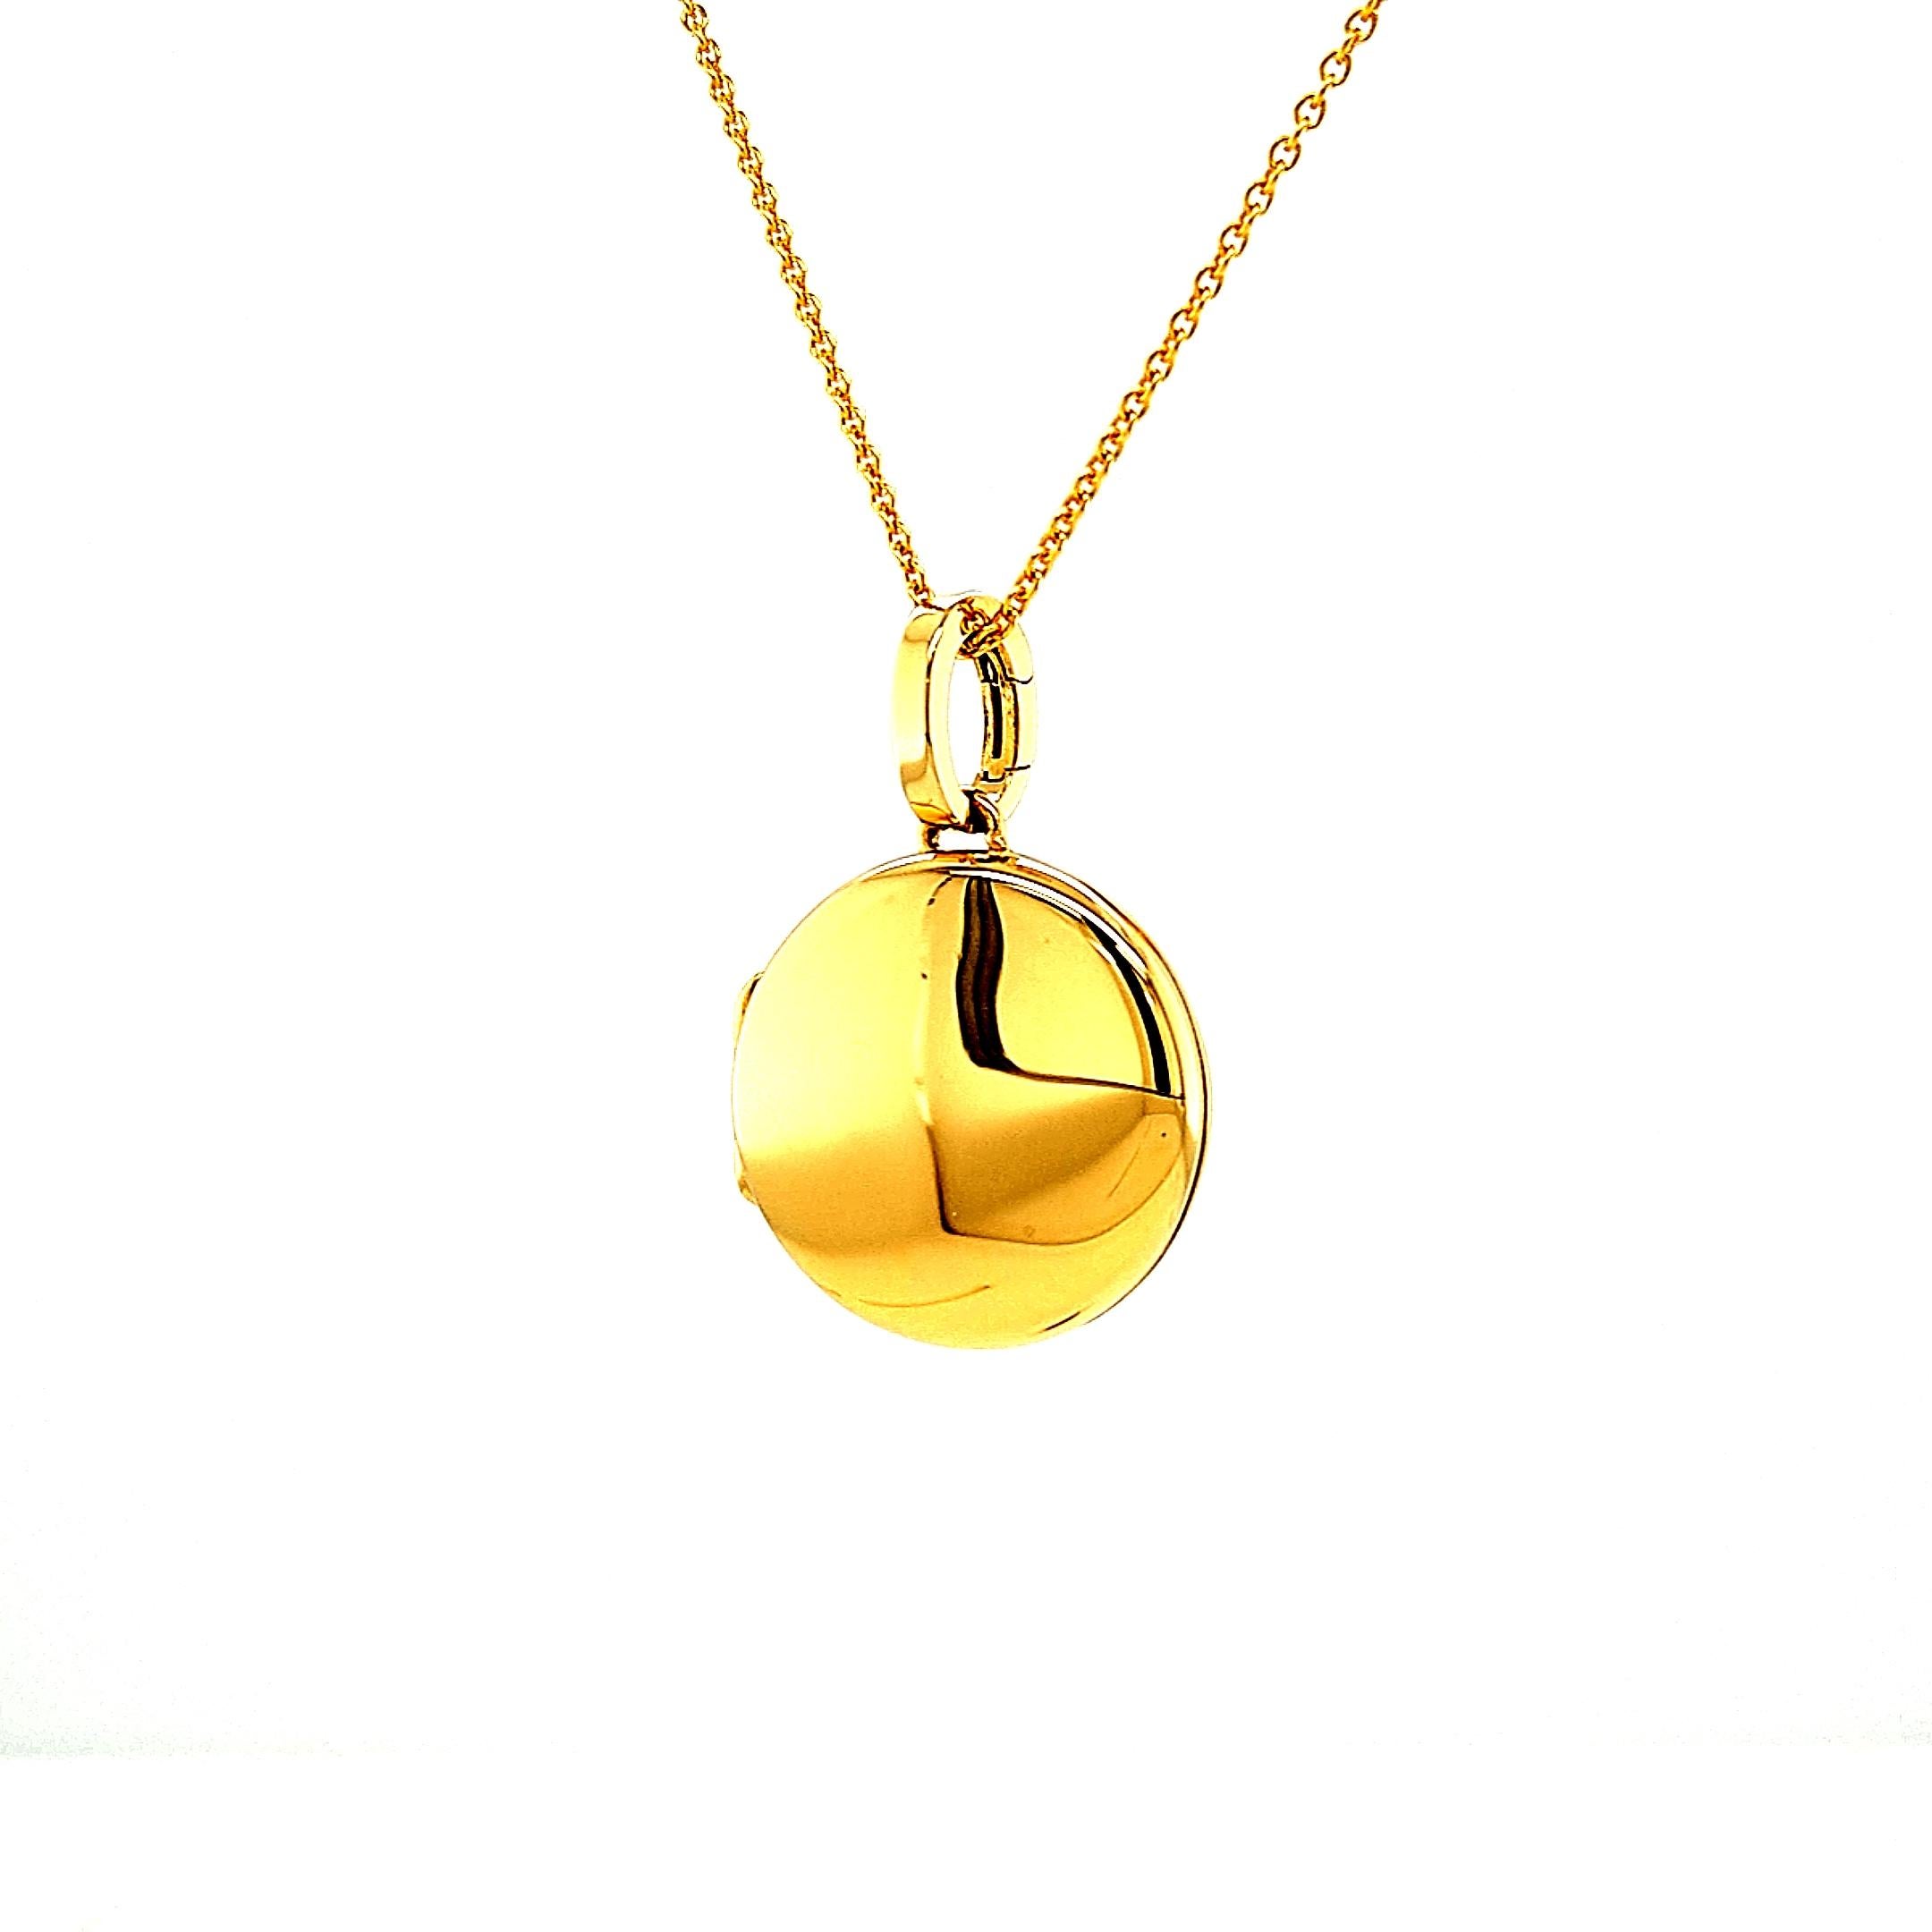 Victor Mayer customizable round polished pendant locket 18k yellow gold, Hallmark Collection, diameter app. 26.0 mm

About the creator Victor Mayer
Victor Mayer is internationally renowned for elegant timeless designs and unrivalled expertise in